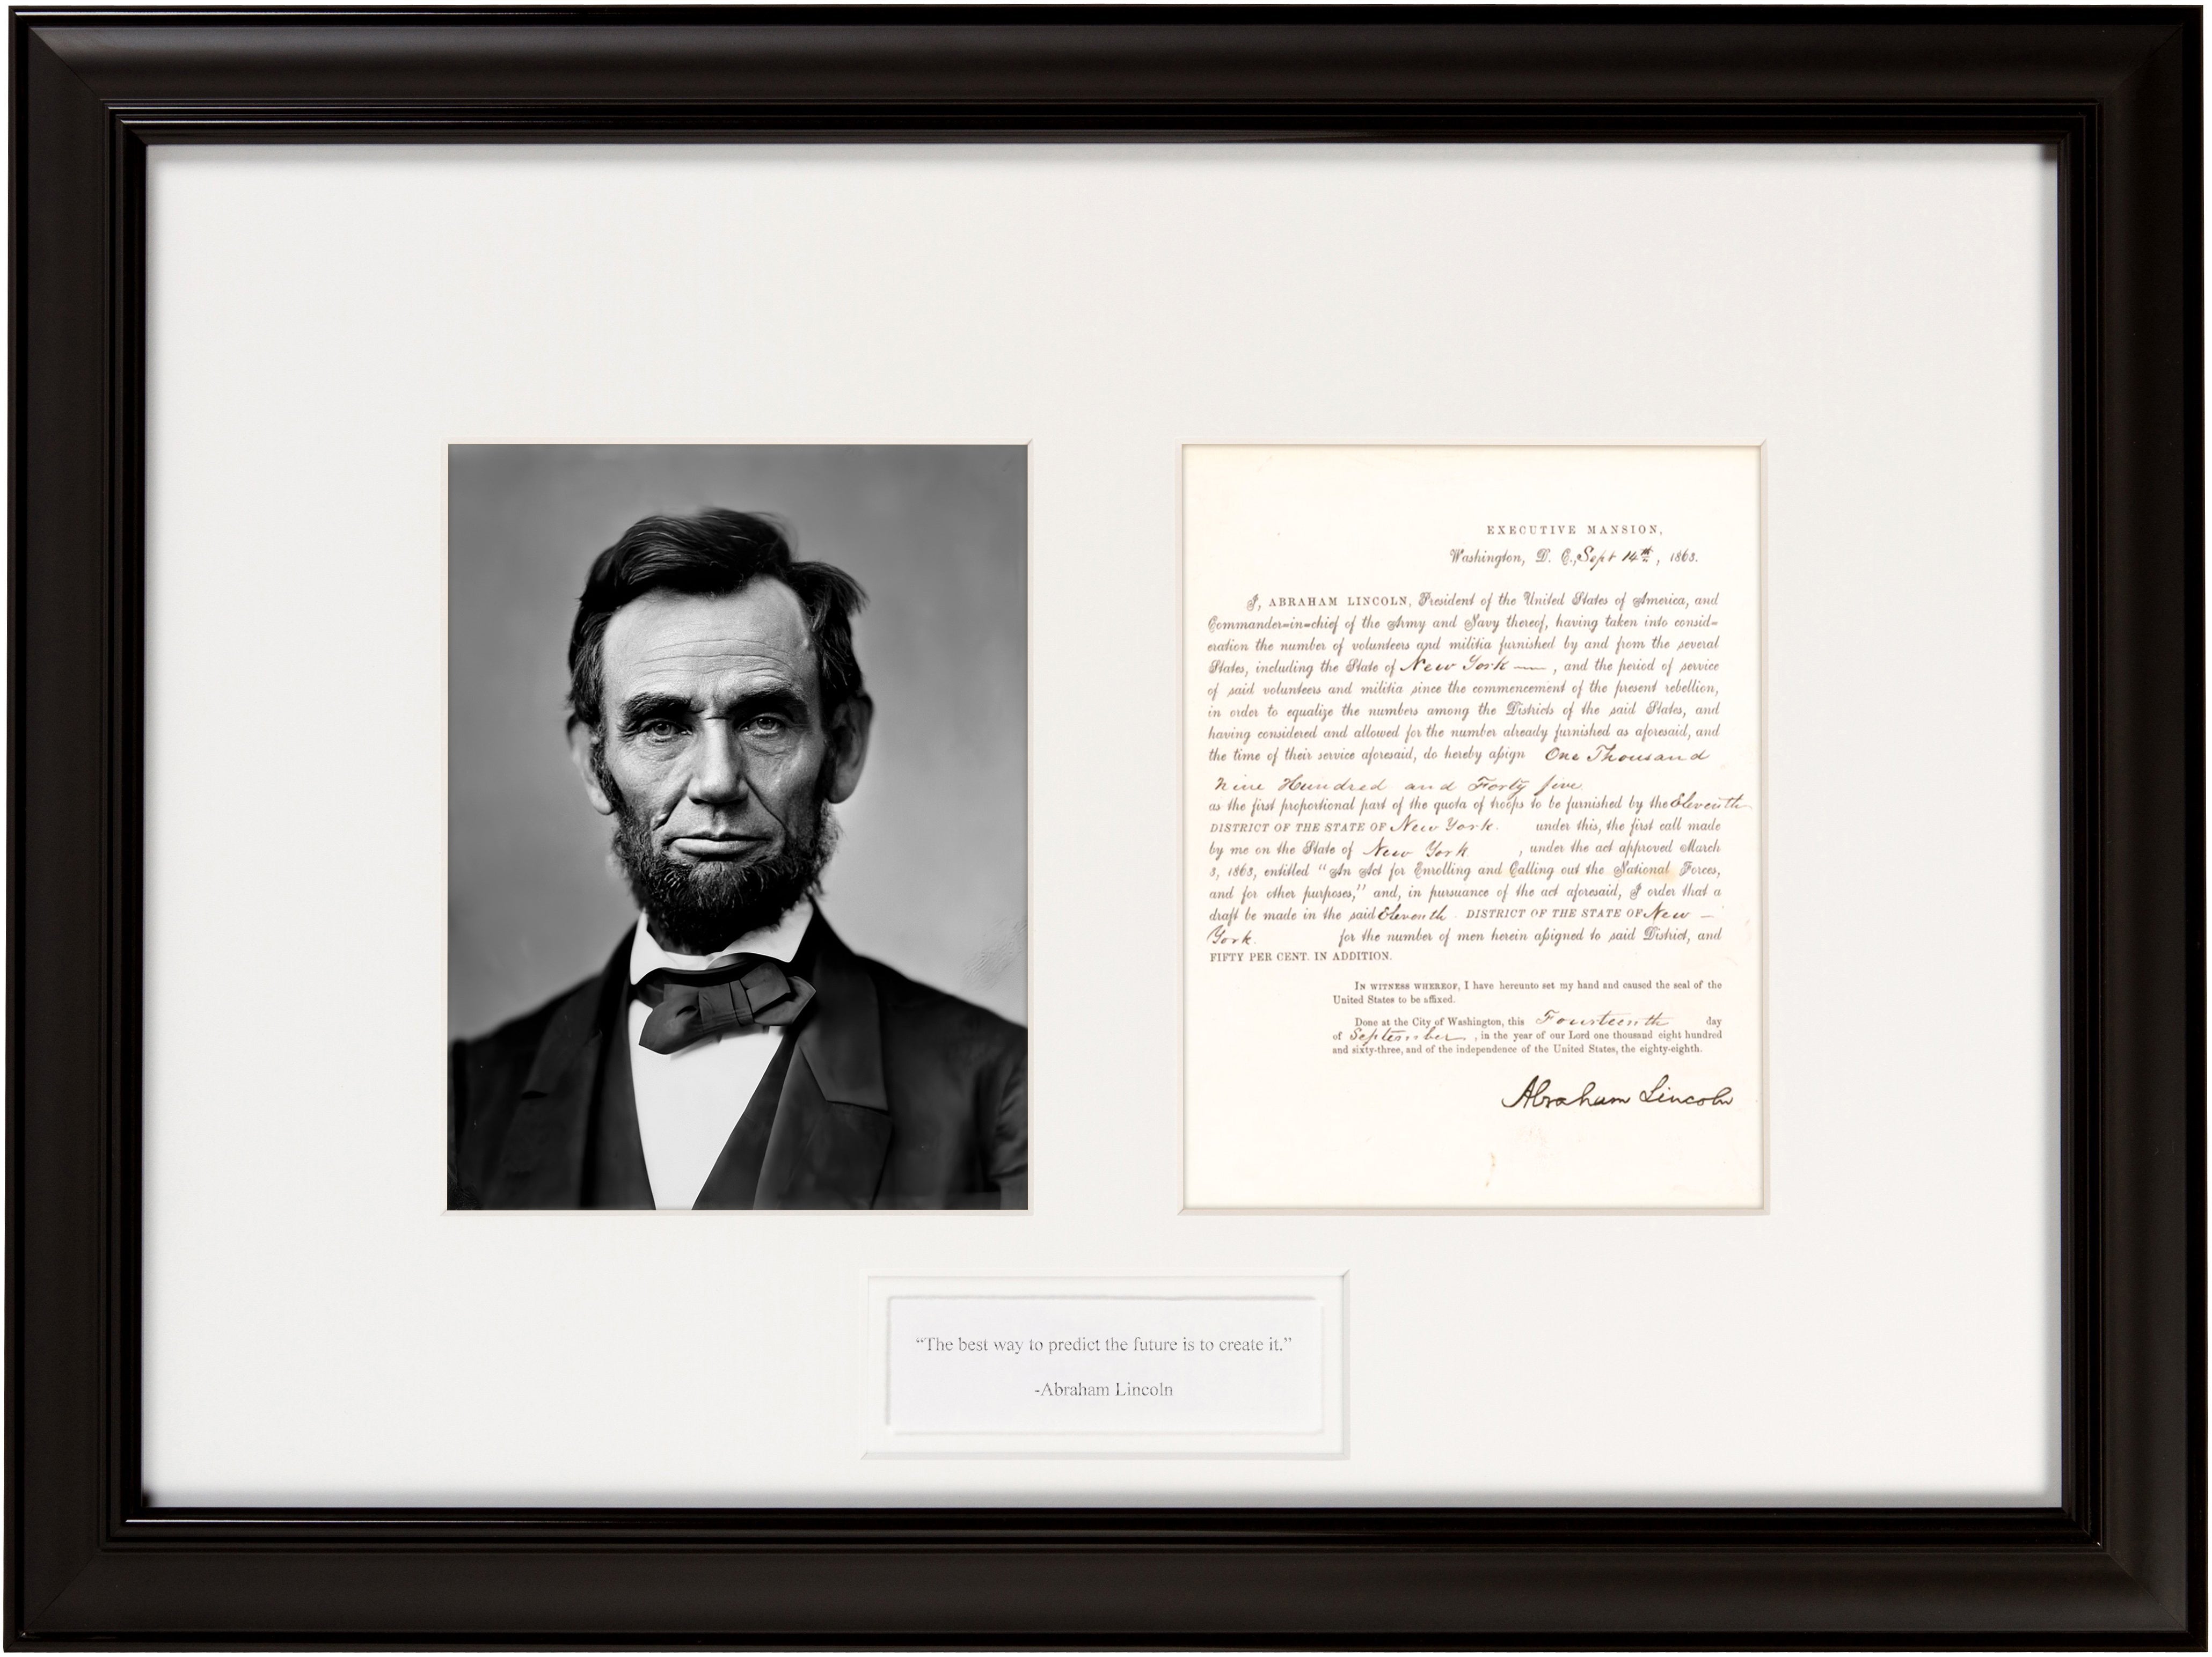 Beautiful Abraham Lincoln Signed 1863 Whitehouse Letterhead: "The best way to predict the future....”